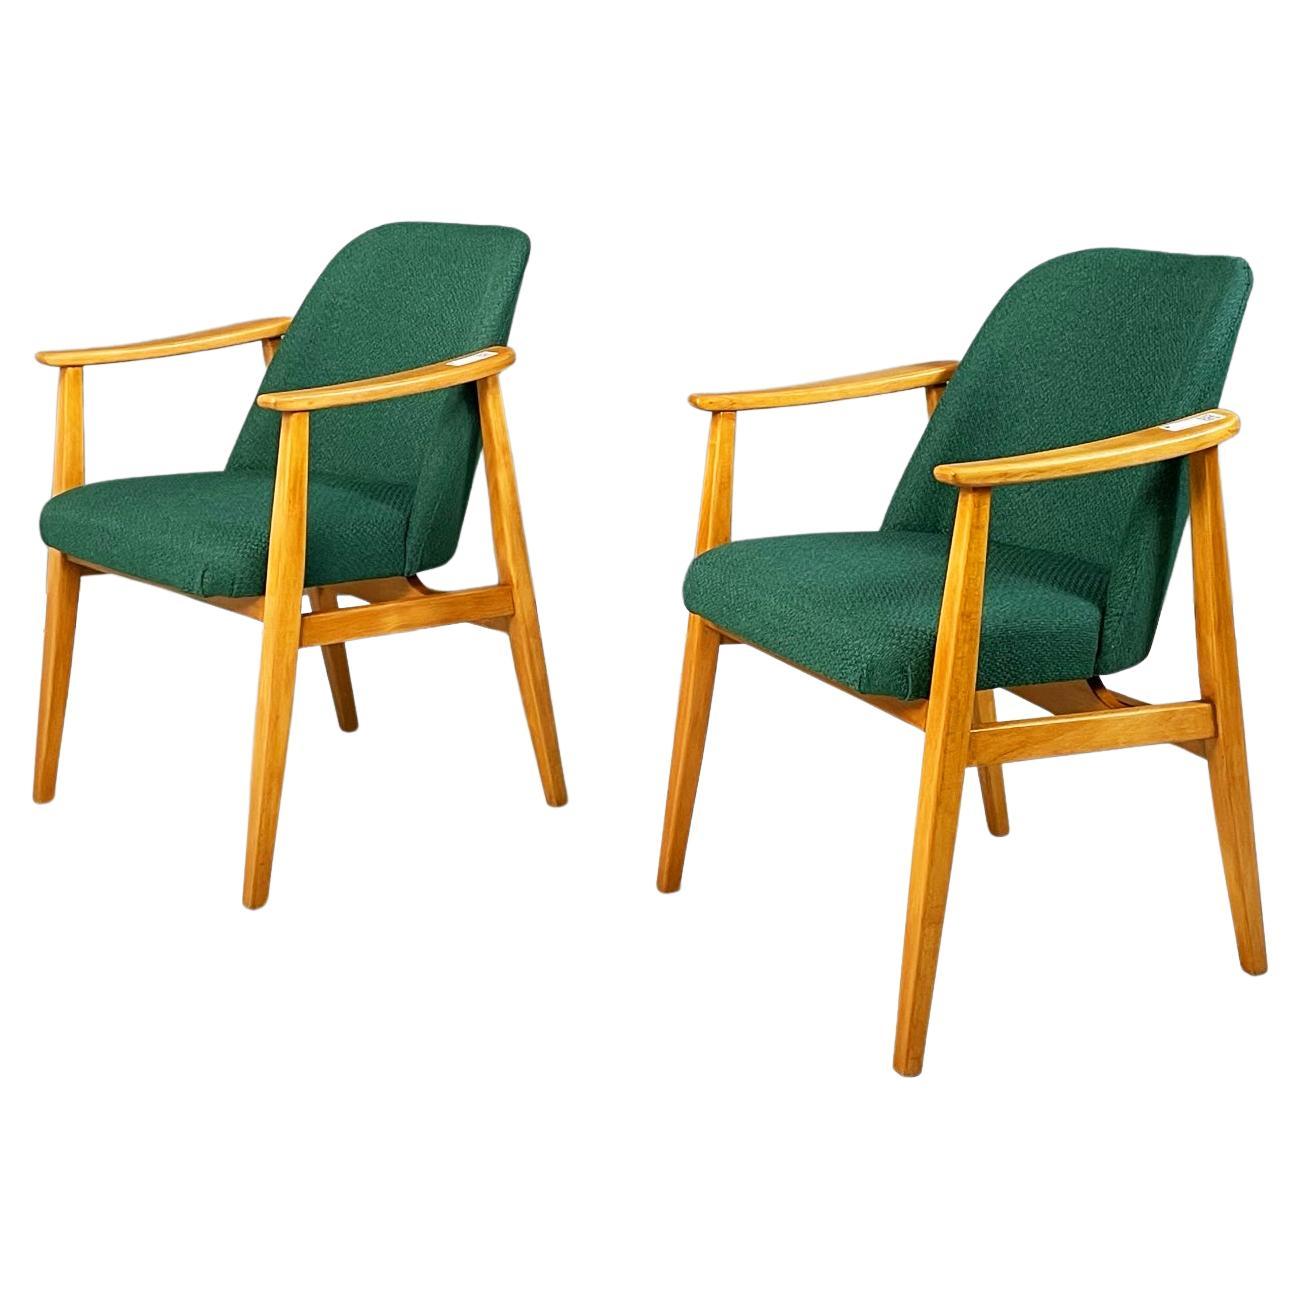 Danish Mid-Century Modern Armchairs in Forest Green Fabric and Wood, 1960s For Sale